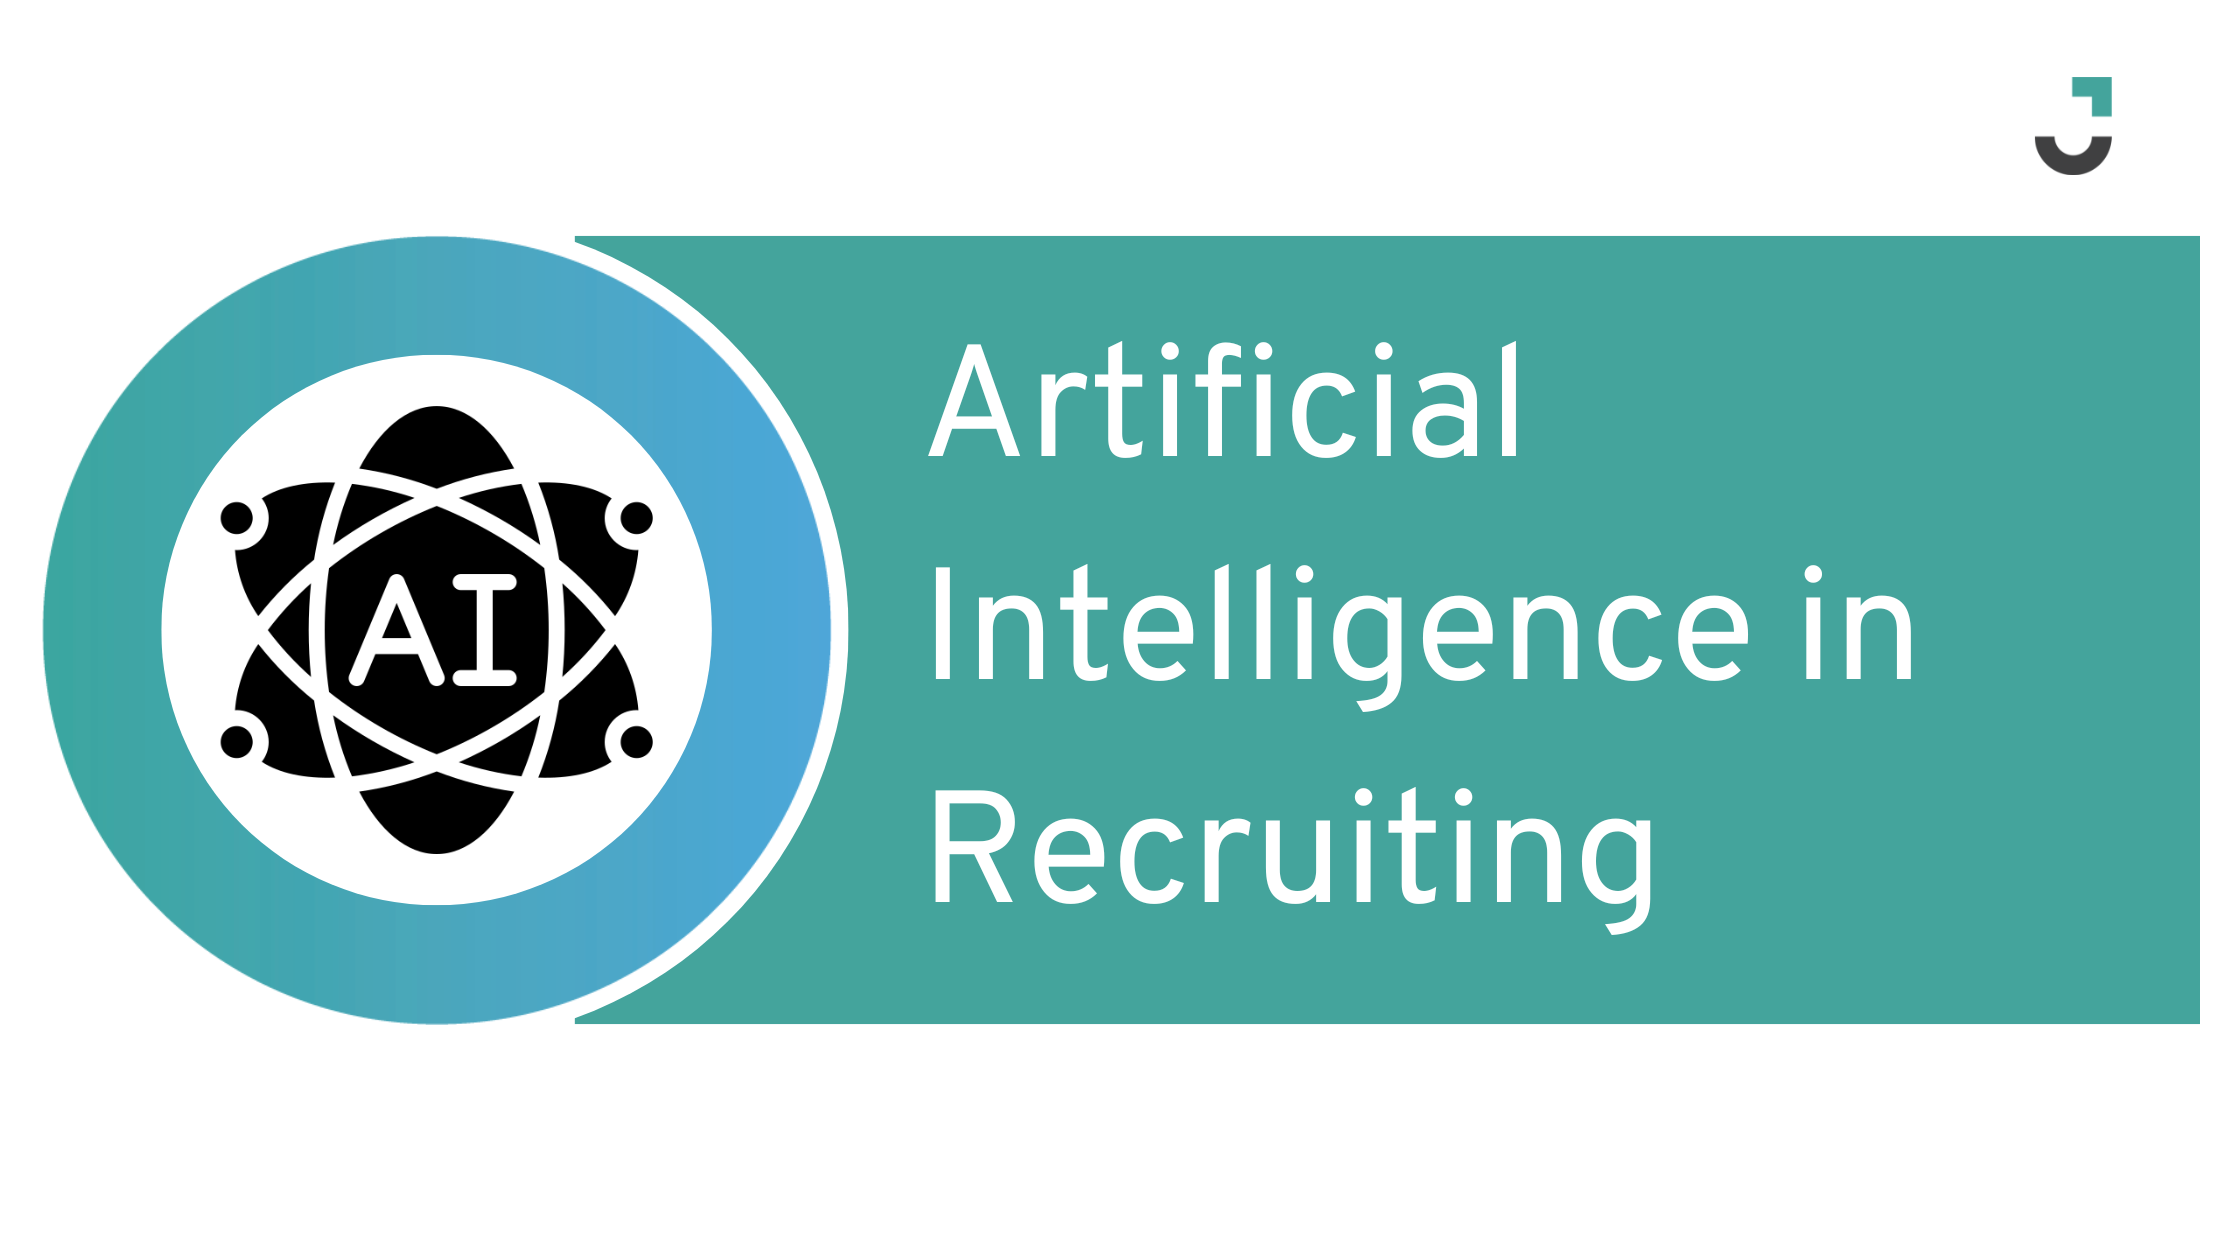 Artificial Intelligence in Recruiting